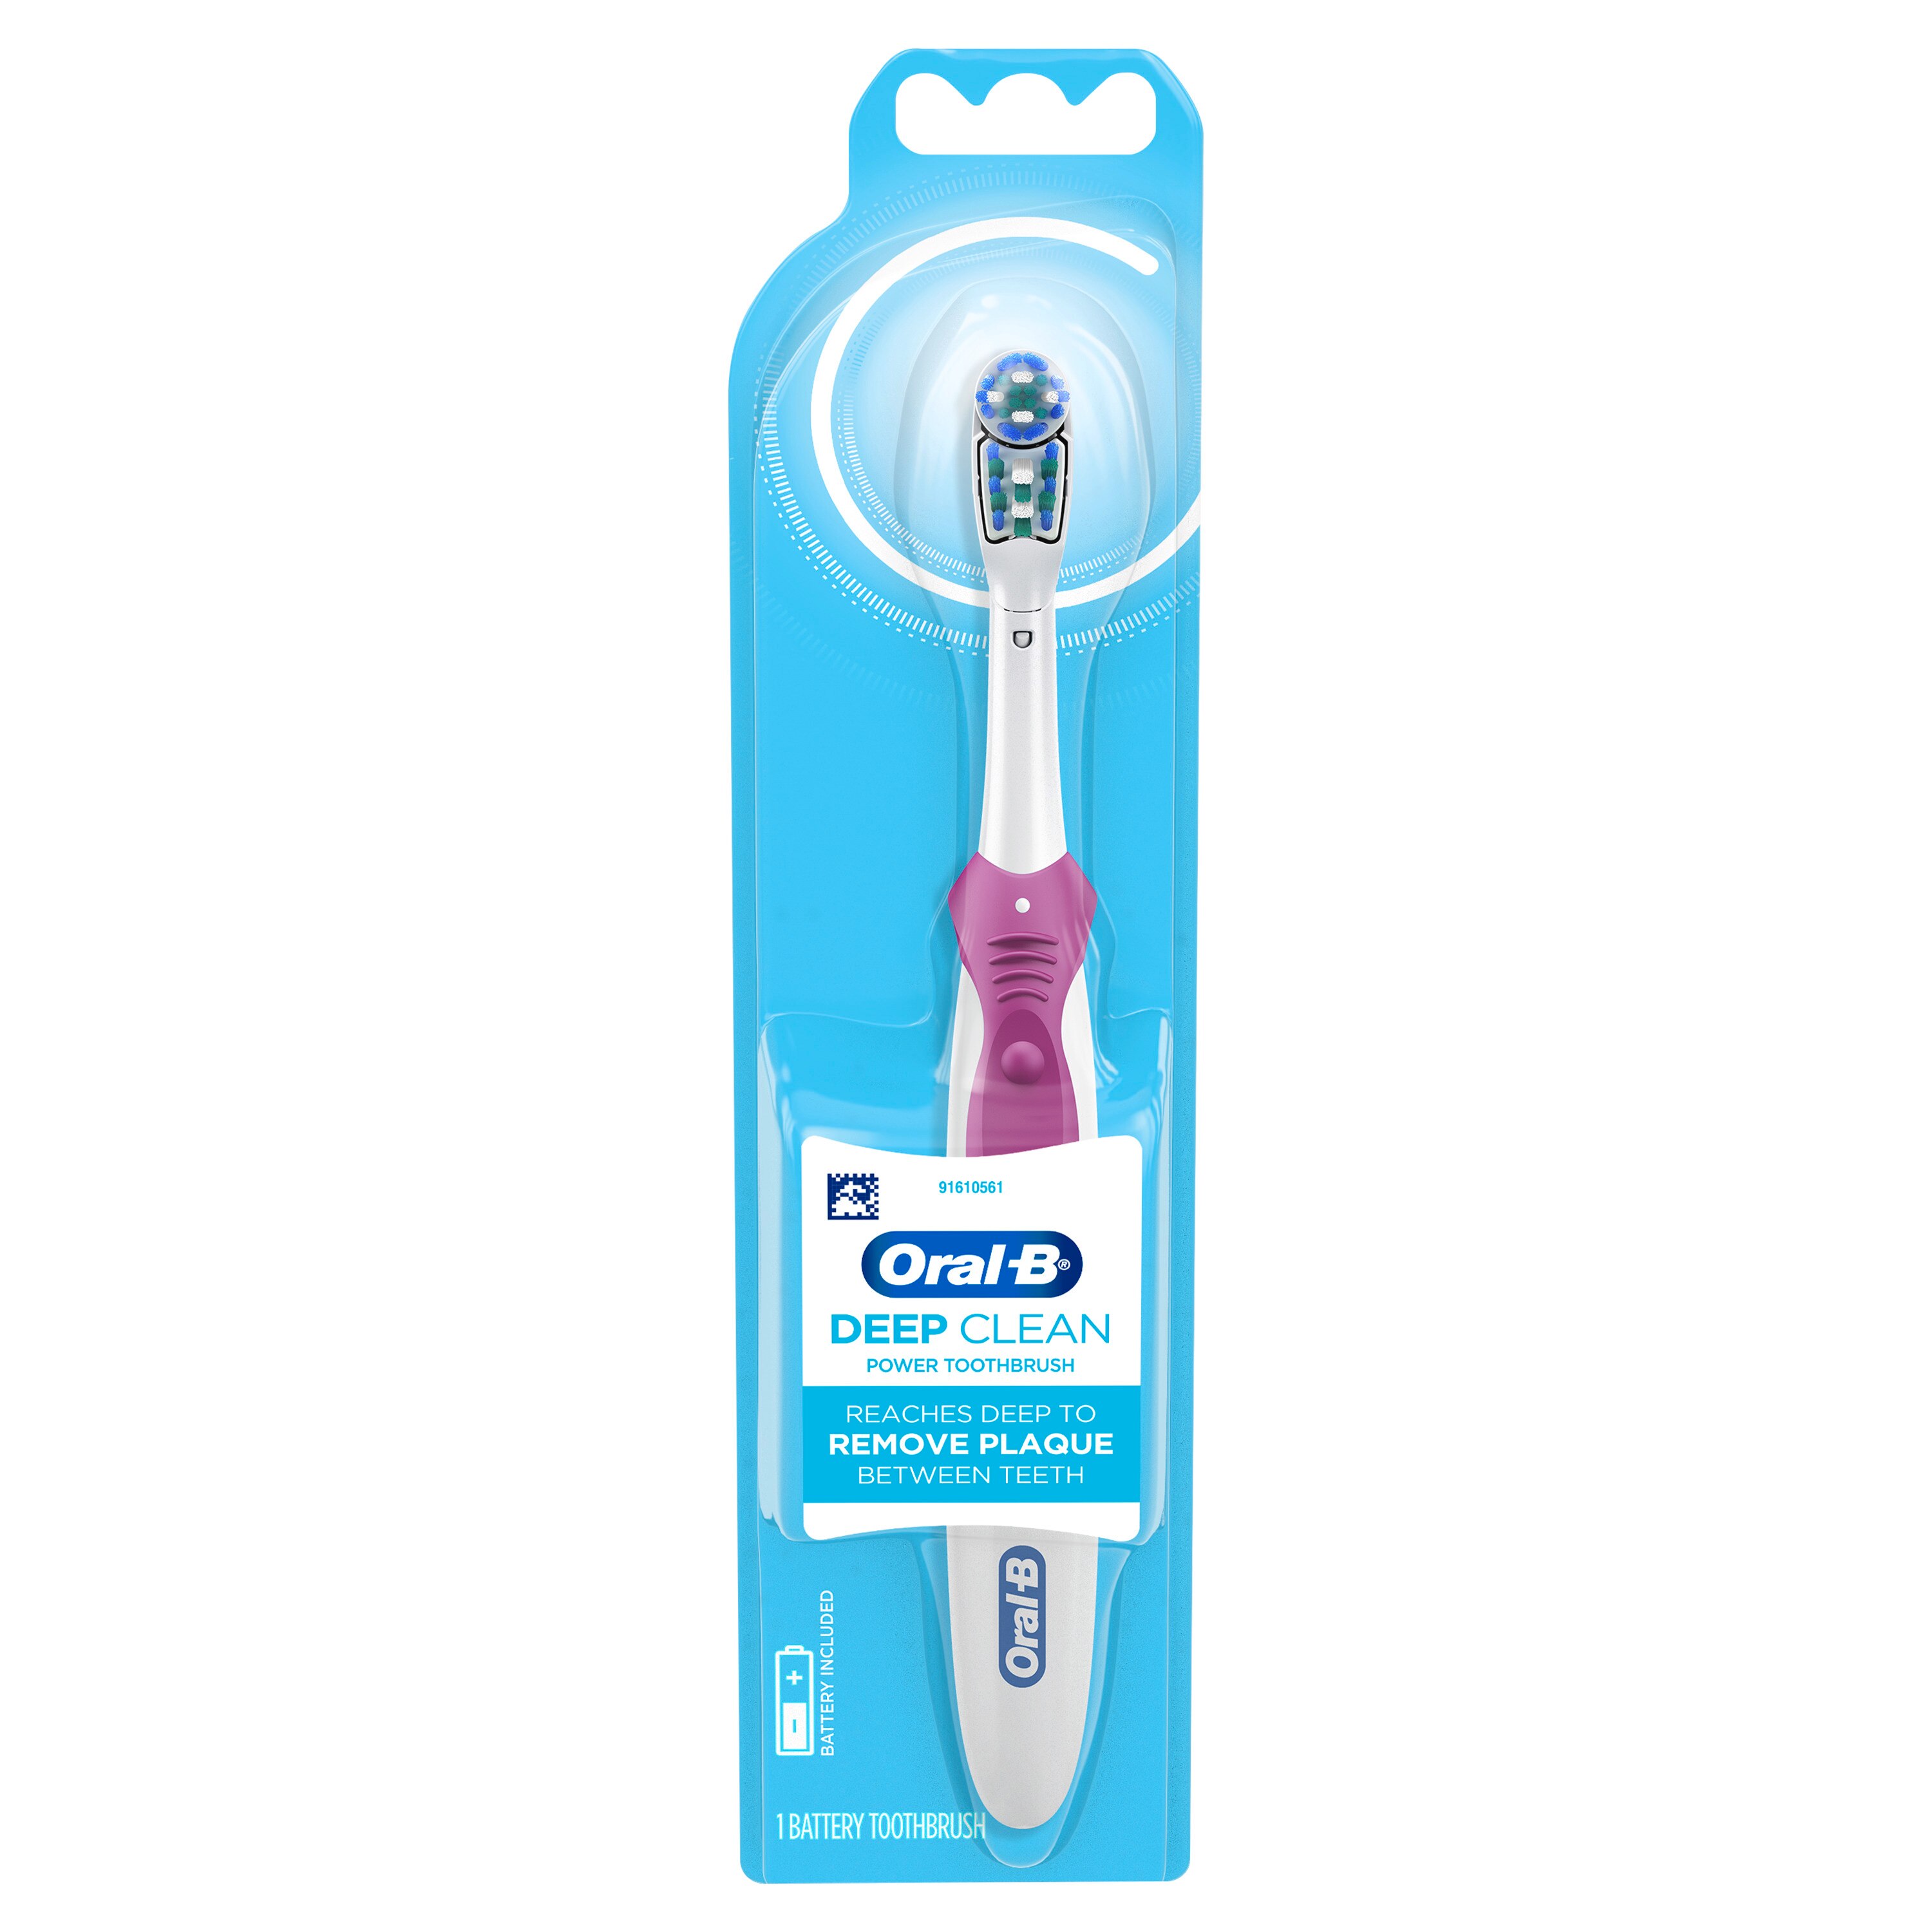 Find The Right Electric Toothbrush For Your Child - Oral-b